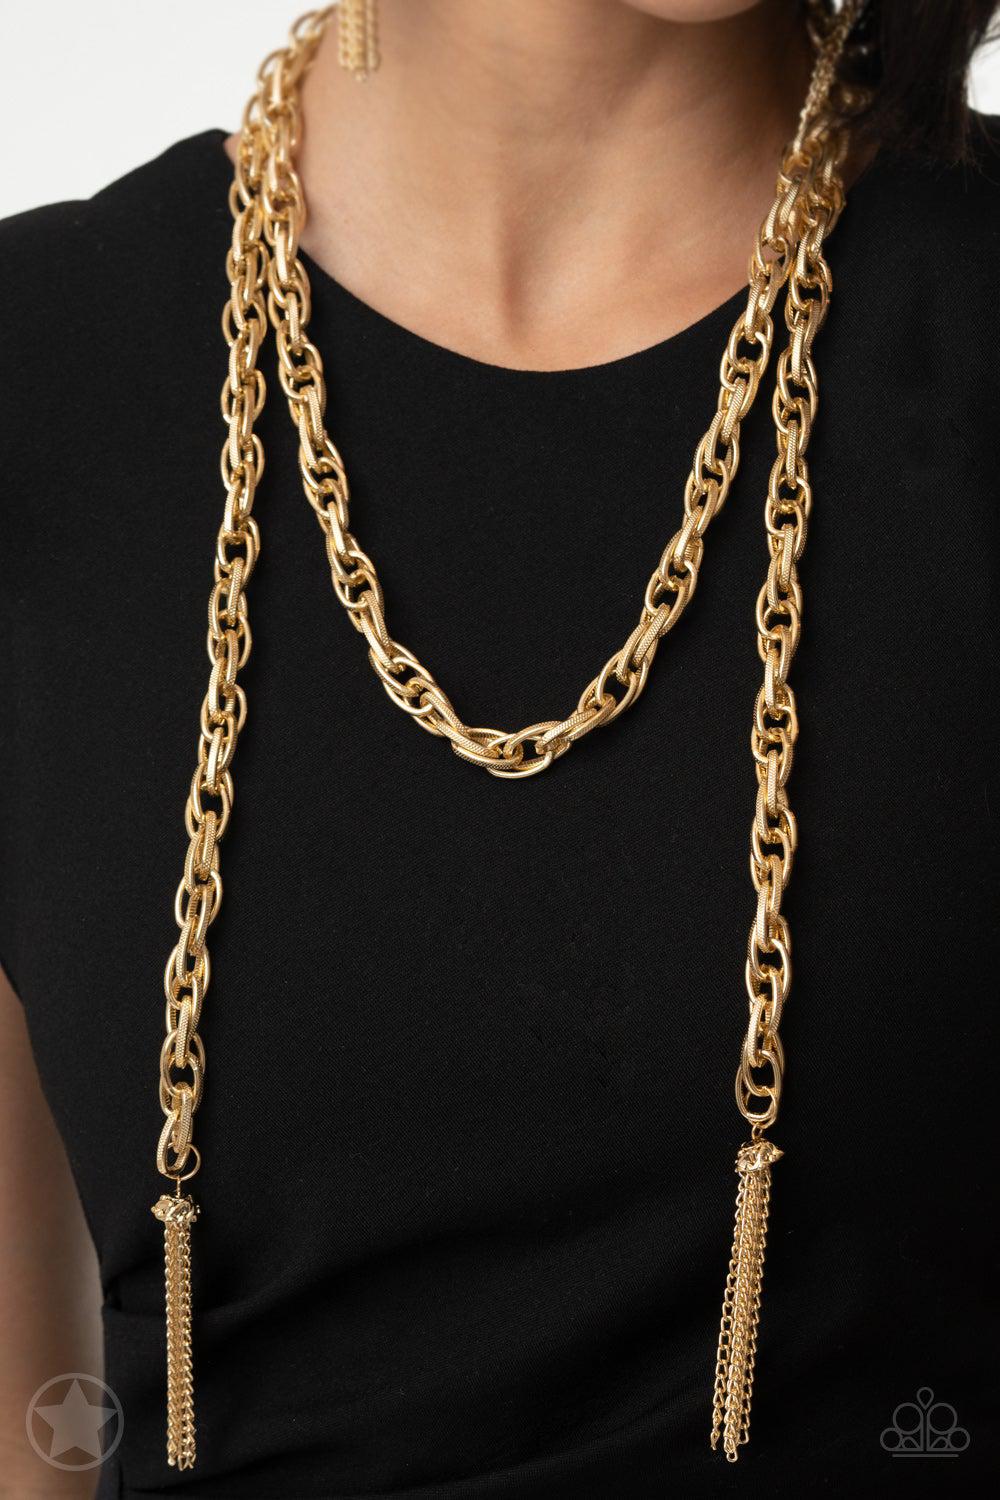 Scarfed for Attention Gold Chain Necklace and matching Earrings - Paparazzi Accessories - lightbox -CarasShop.com - $5 Jewelry by Cara Jewels